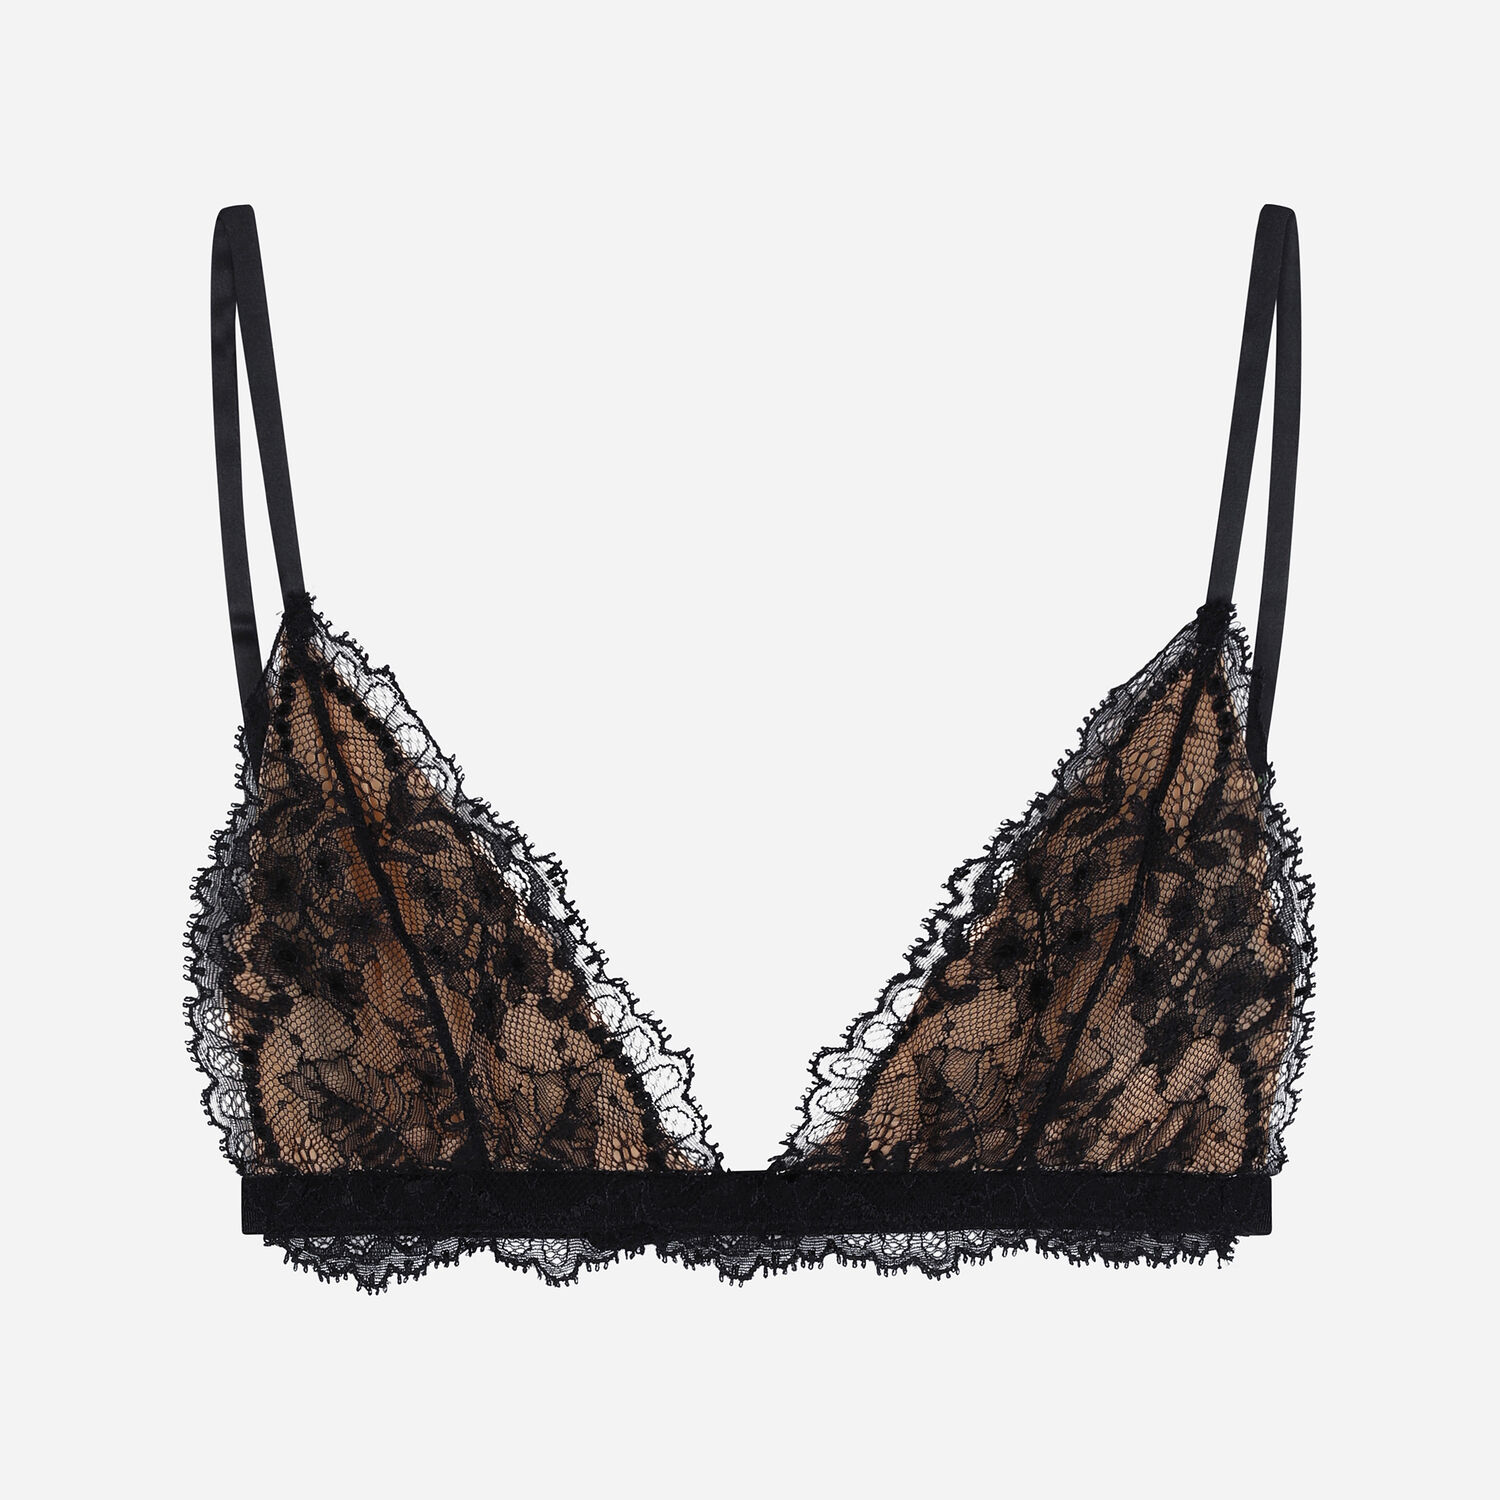 Chantilly lace bustier bra black La Redoute Collections